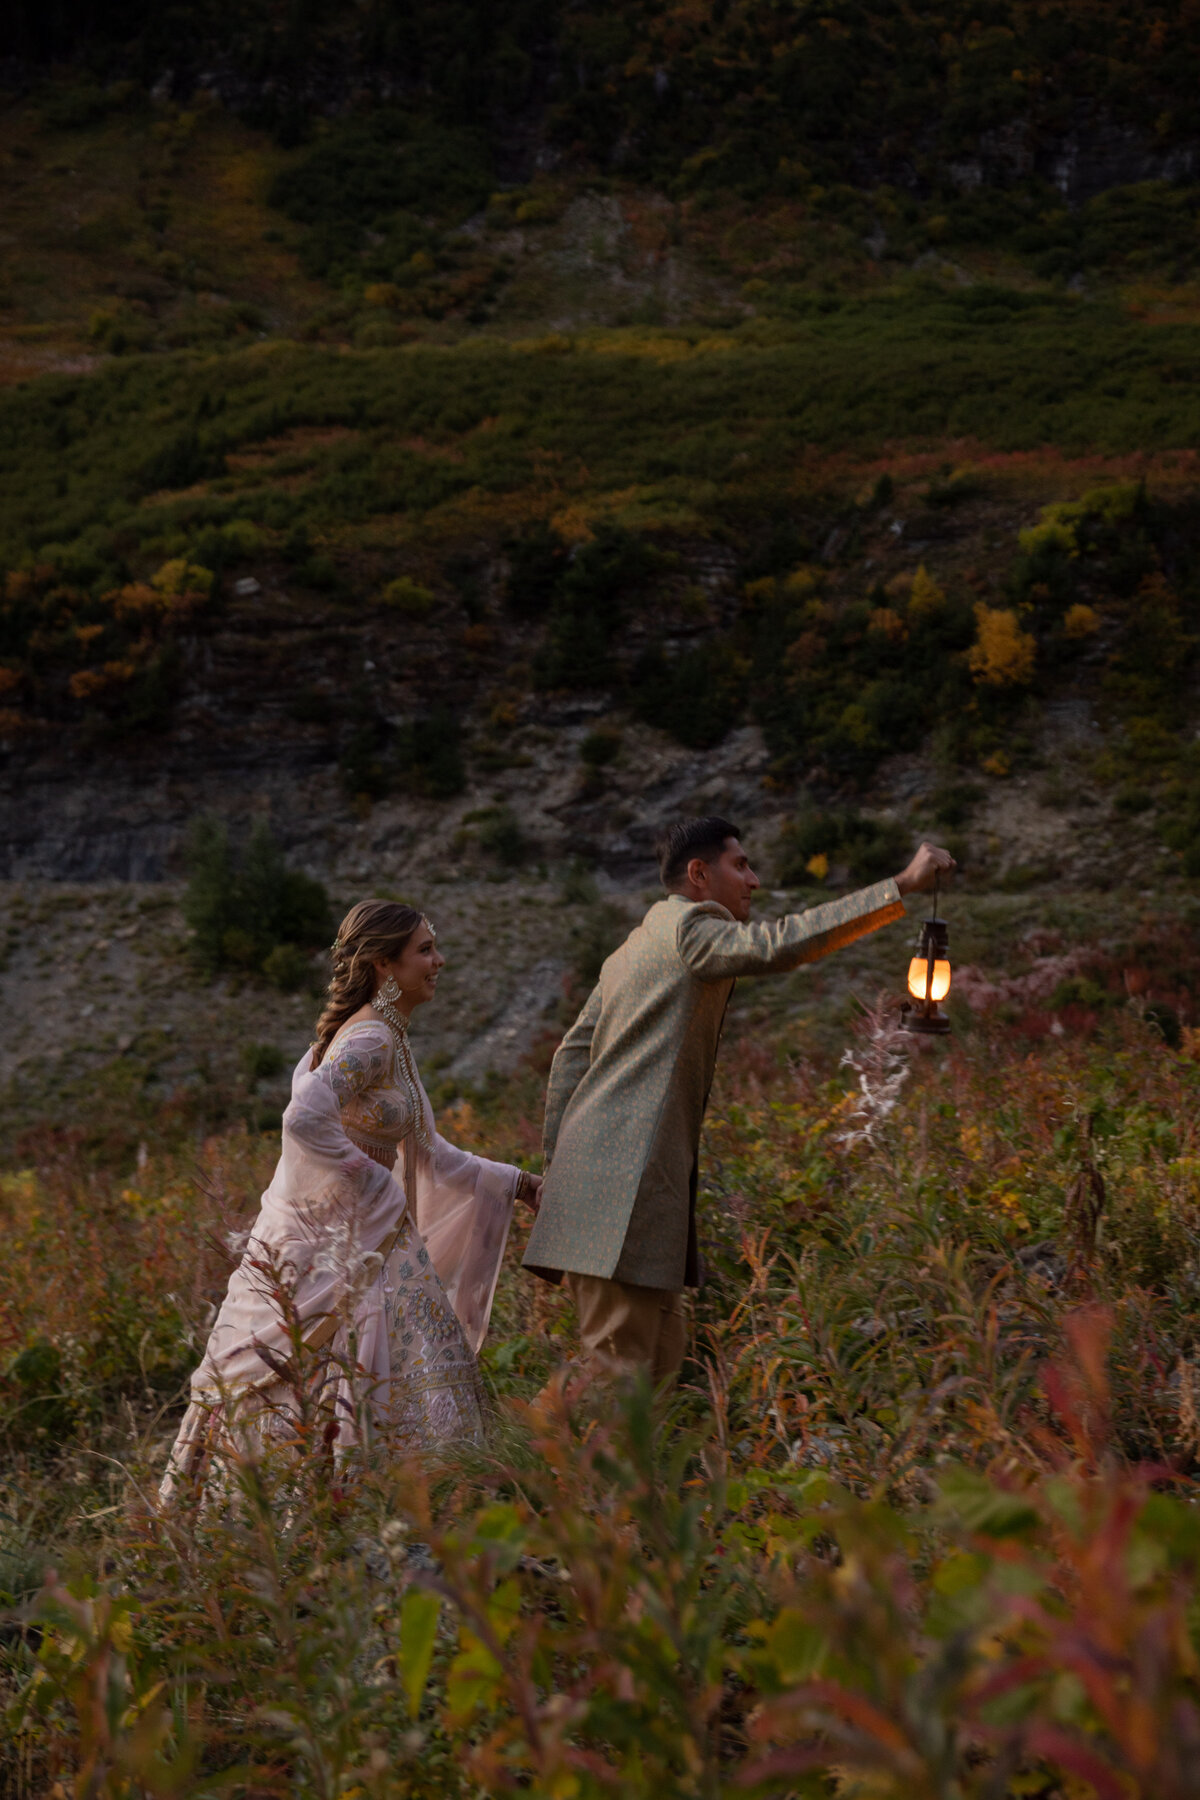 A groom leads his bride through a meadow with a lantern held in front of his face to light the way.